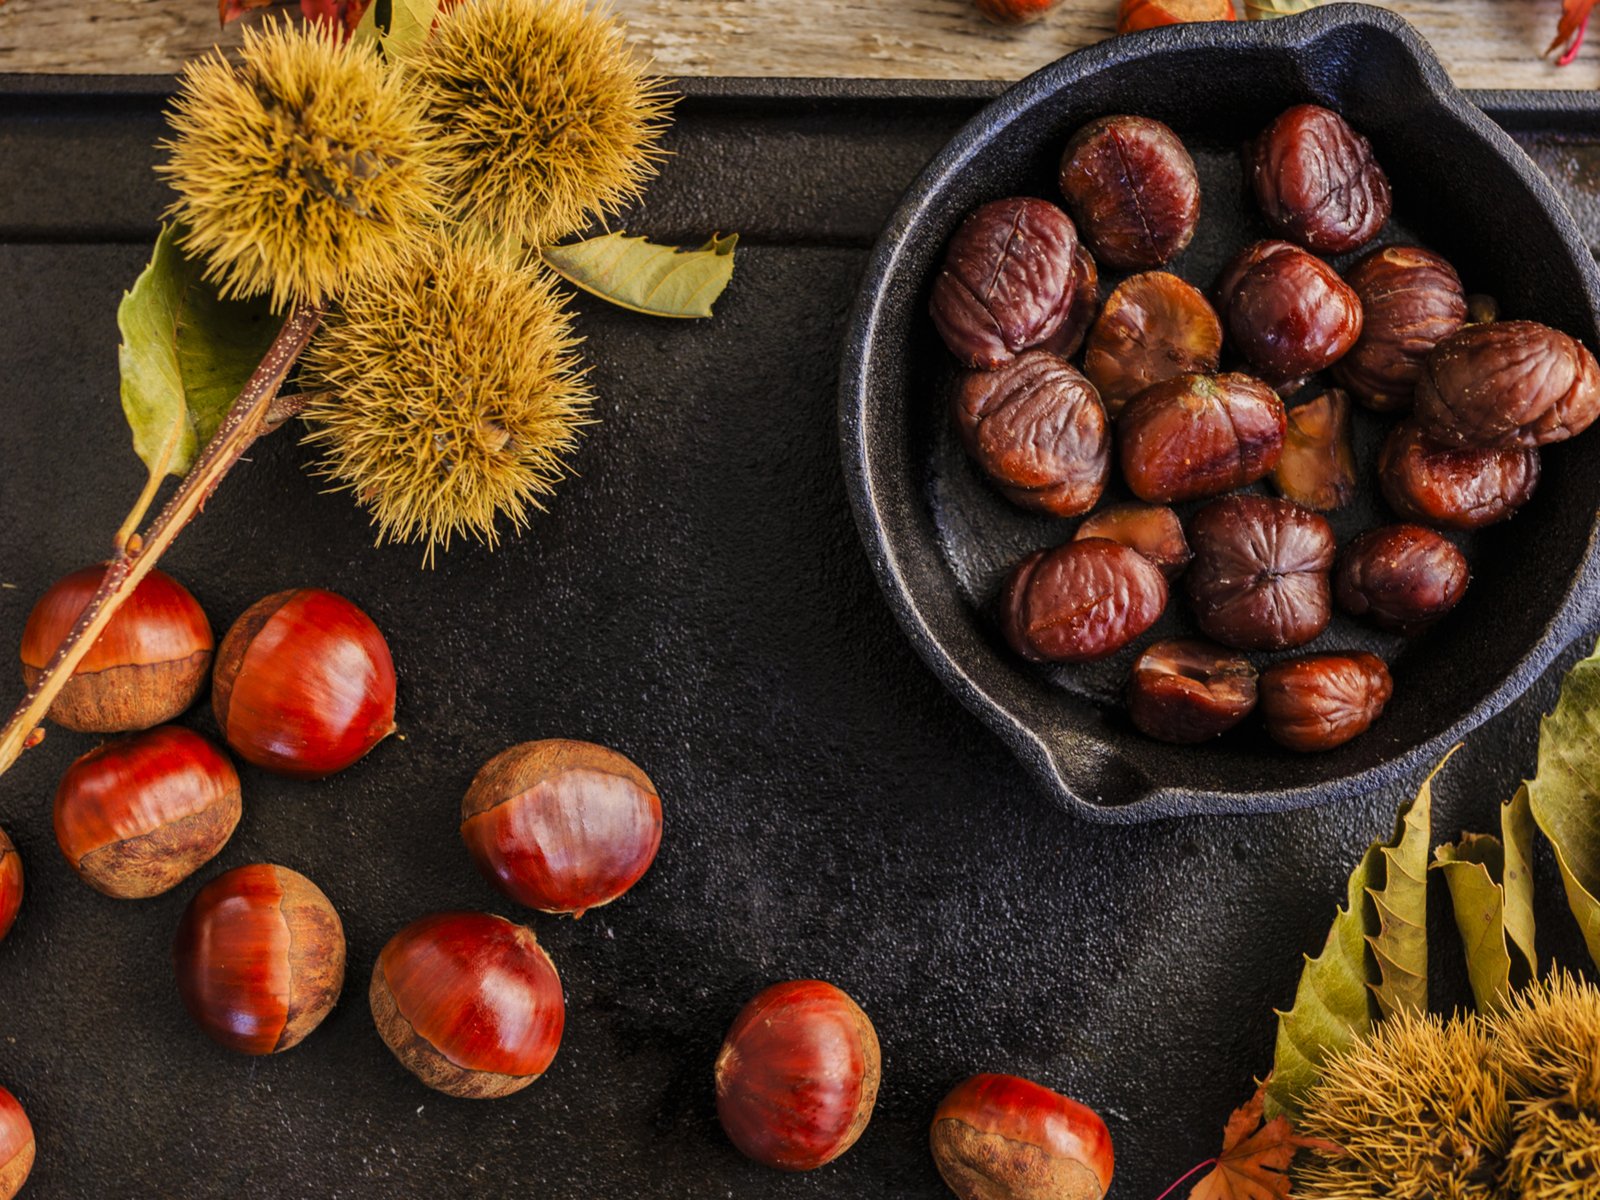 Roasted chestnuts are a delicious winter treat.